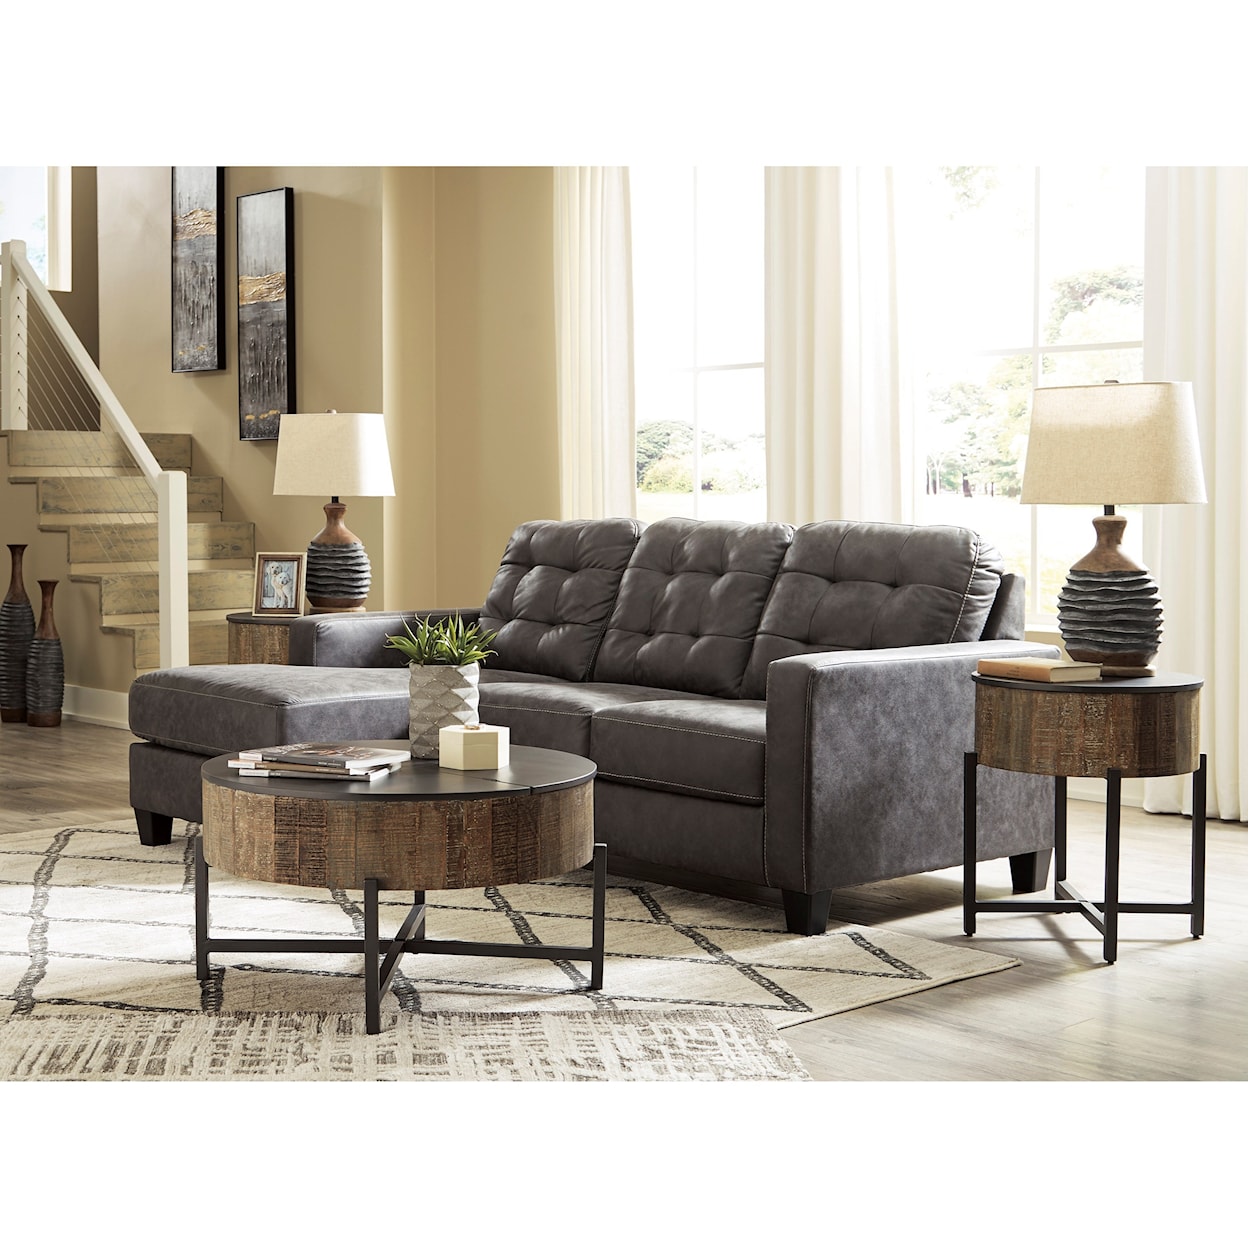 Ashley Furniture Benchcraft Venaldi Queen Sleeper Sofa with Chaise